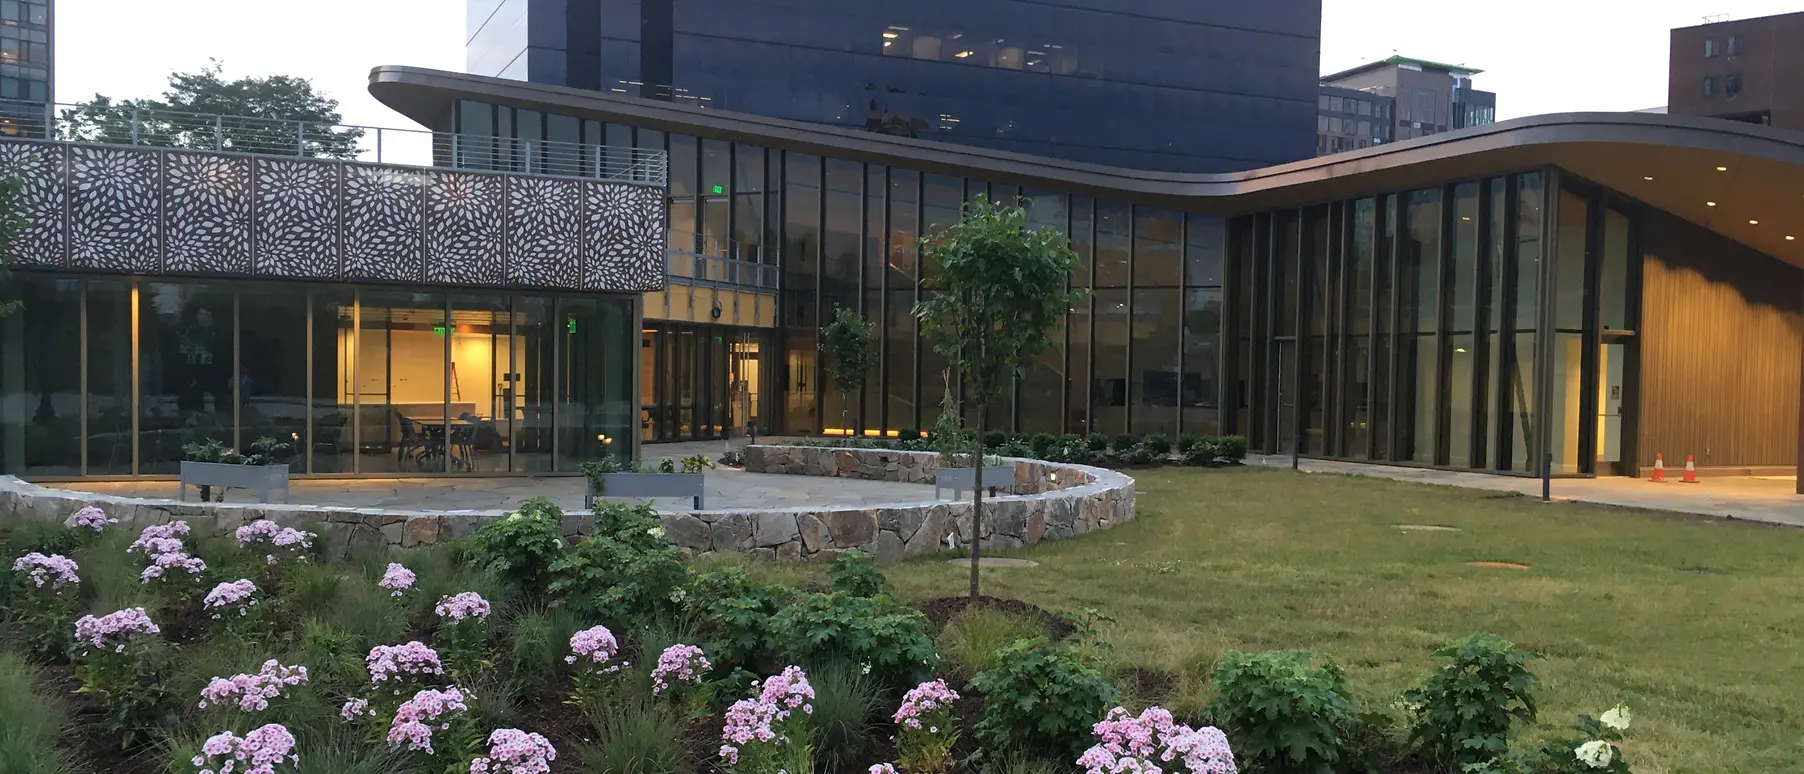 Flower bed in foreground of building with glass walls